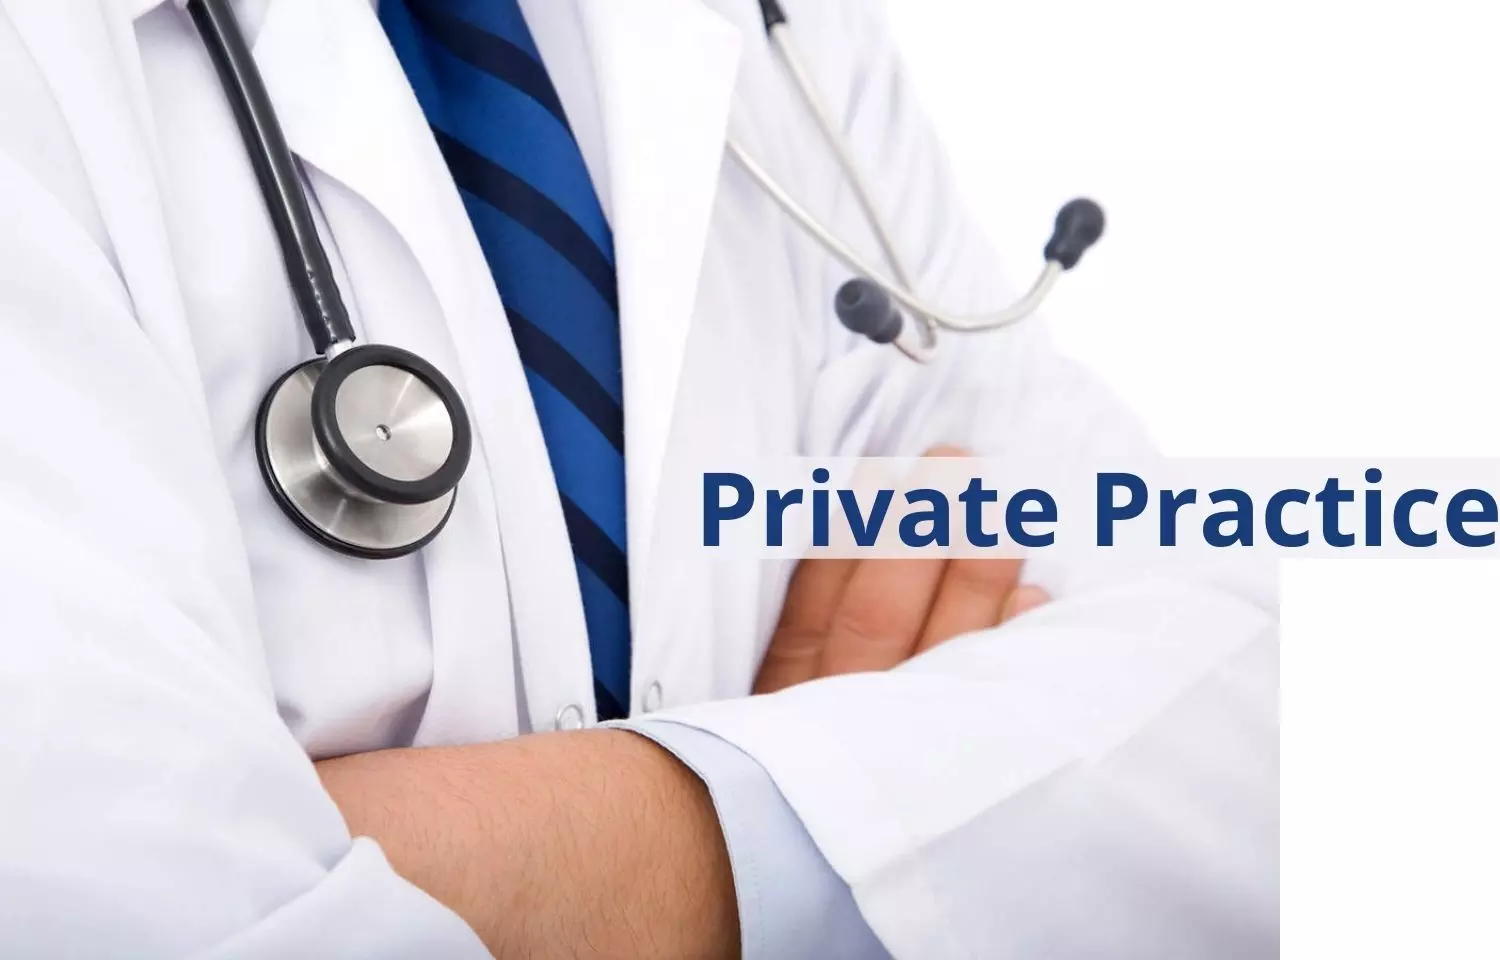 J&K: Three doctors banned from private practice for violating treatment guidelines